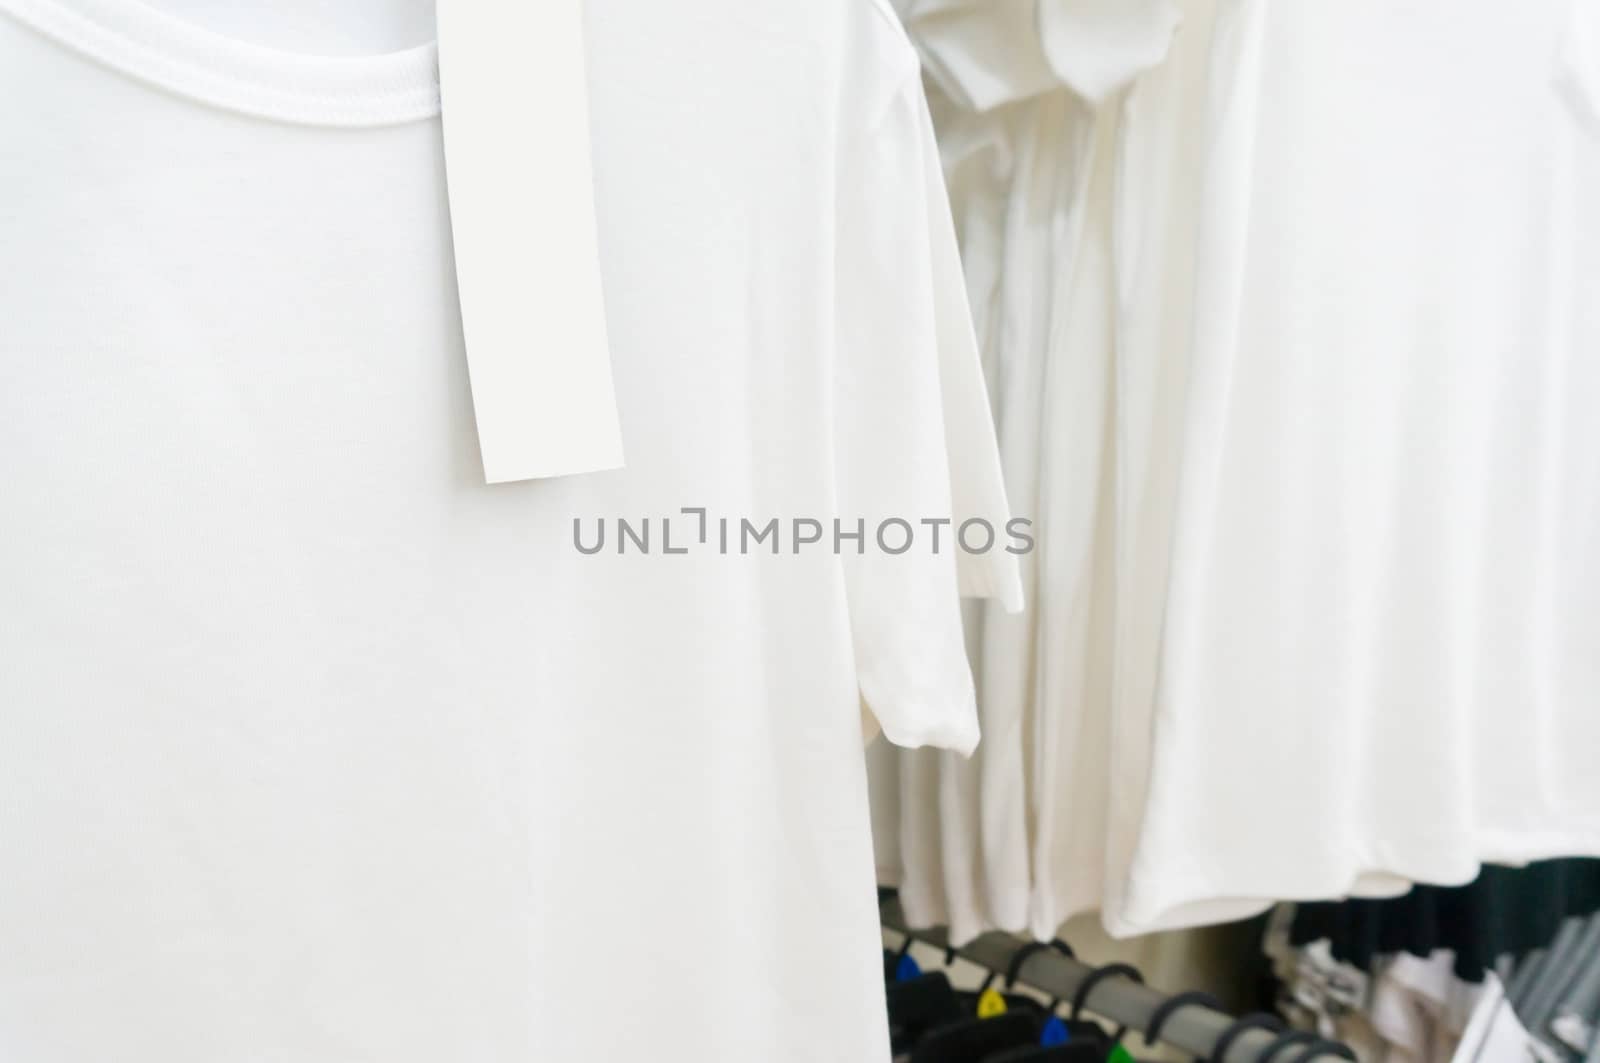 blank price tag hang over white tshirt on Hanger Shelf in Supermarket or Hypermarket Retail Store Outlet, Shallow Depth of Field.